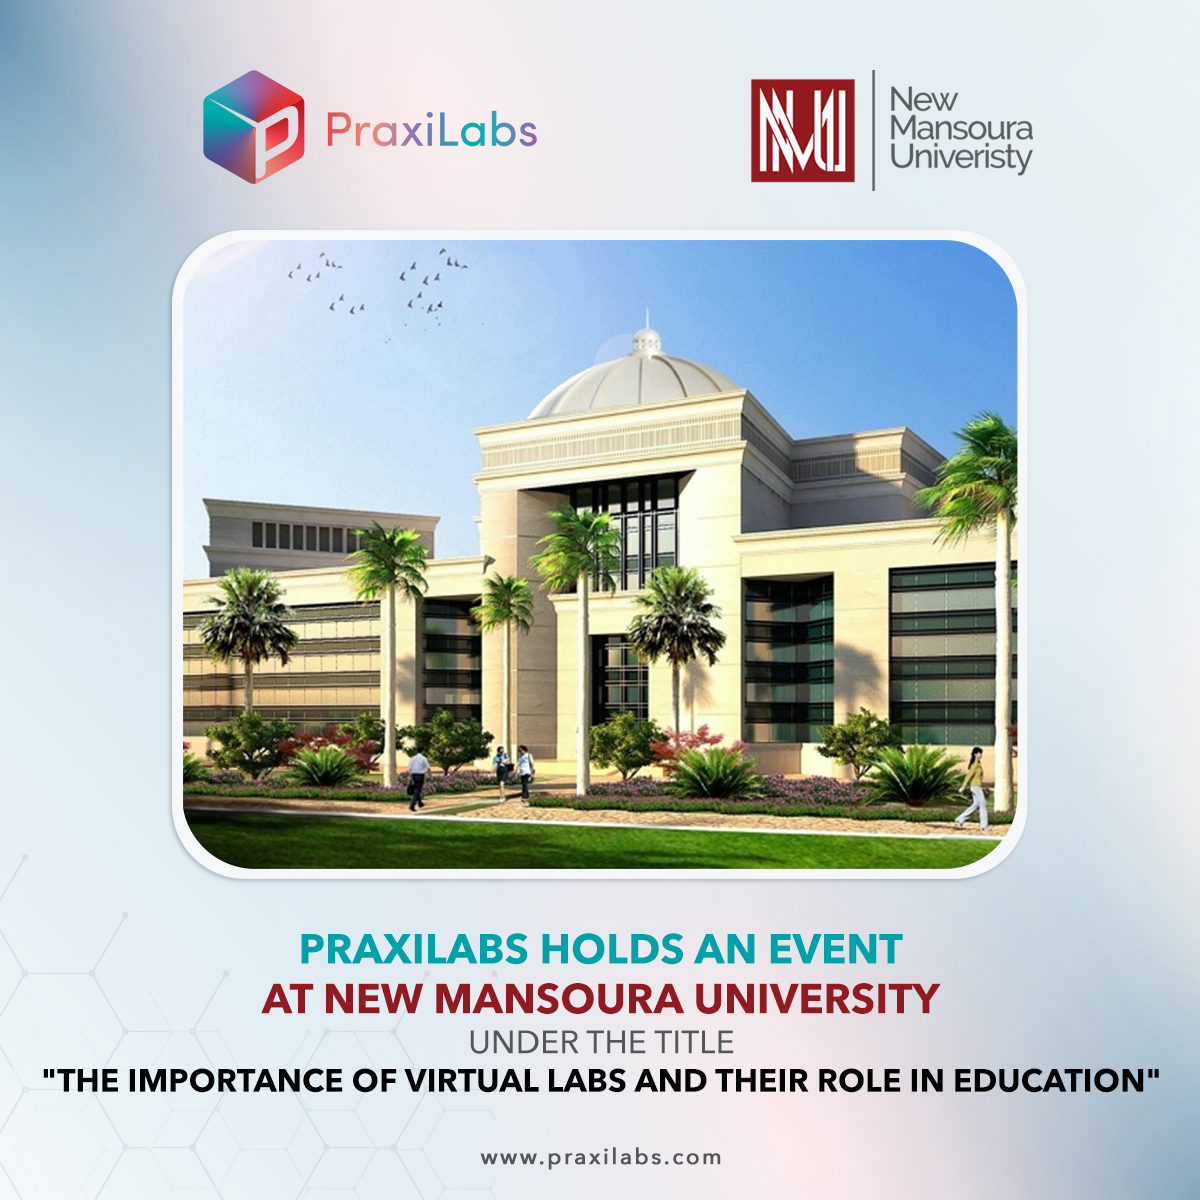 PraxiLabs Holds an Event at New Mansoura University Titled "The Importance of Virtual Labs and Their Role in Education"